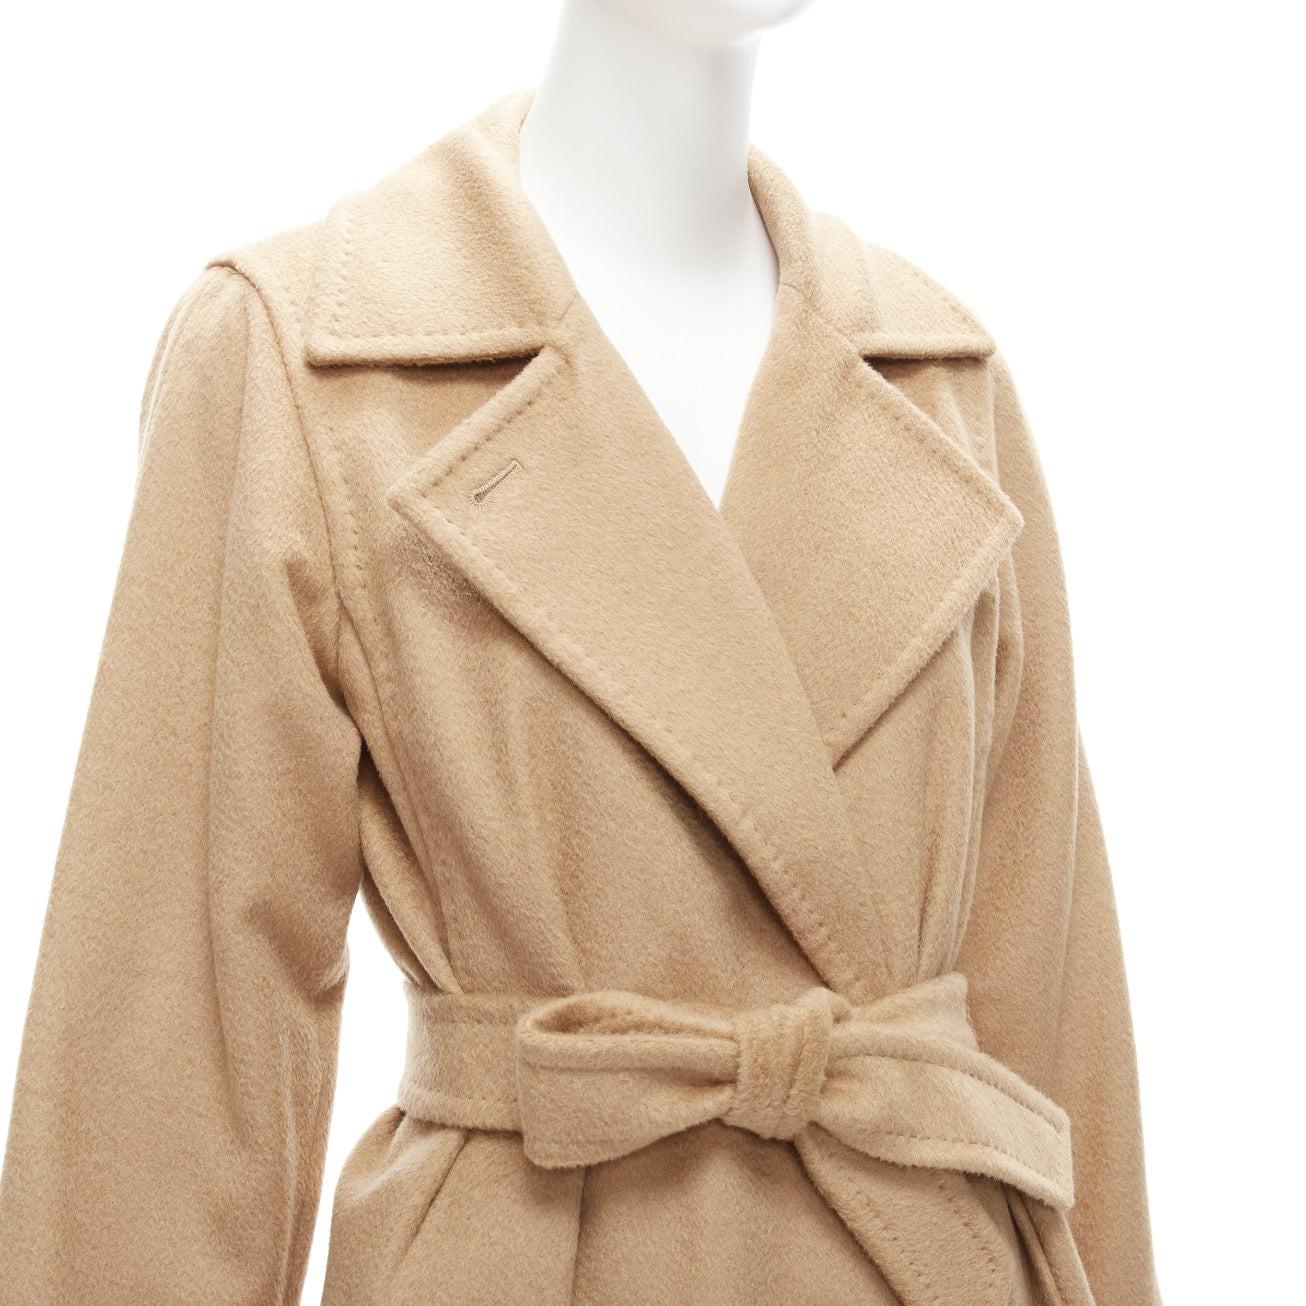 MAX MARA 100% camel tan collared longline belted wrap coat FR36 S
Reference: JACG/A00126
Brand: Max Mara
Material: Camel
Color: Beige
Pattern: Solid
Closure: Belt
Lining: Gold Fabric
Made in: Italy

CONDITION:
Condition: Very good, this item was